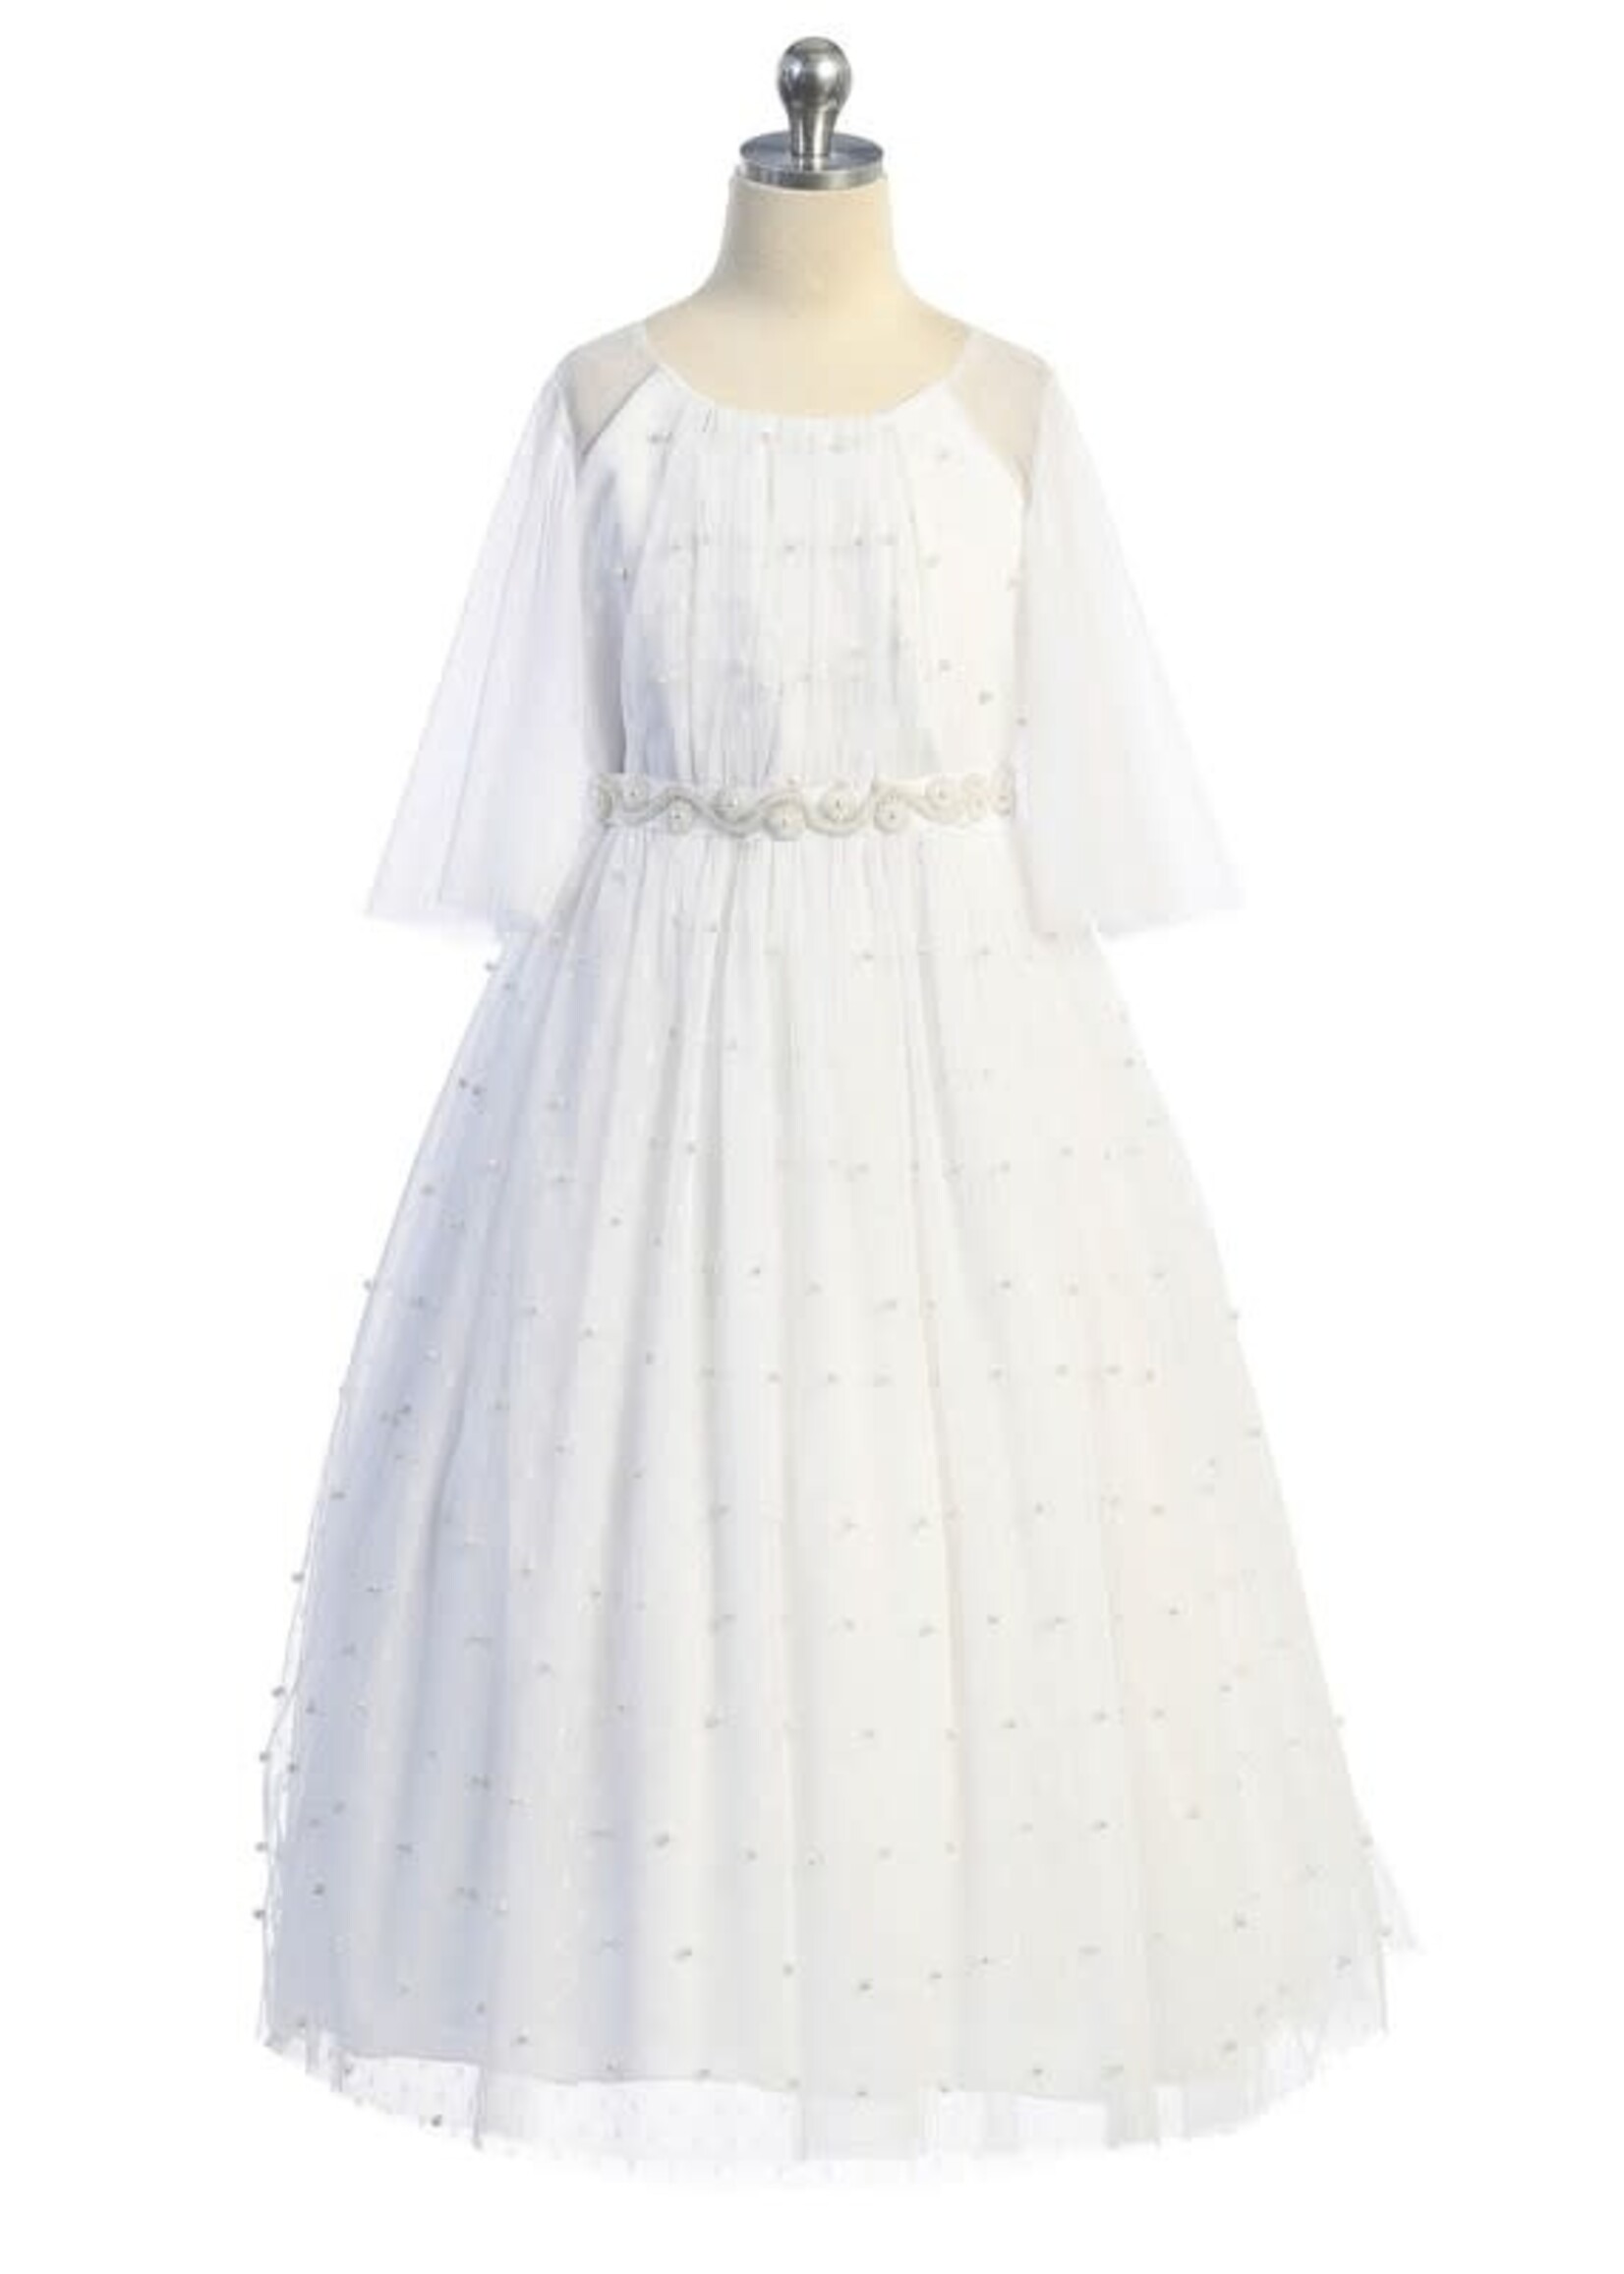 KD512 -PEARL BEADED HOLY COMMUNION